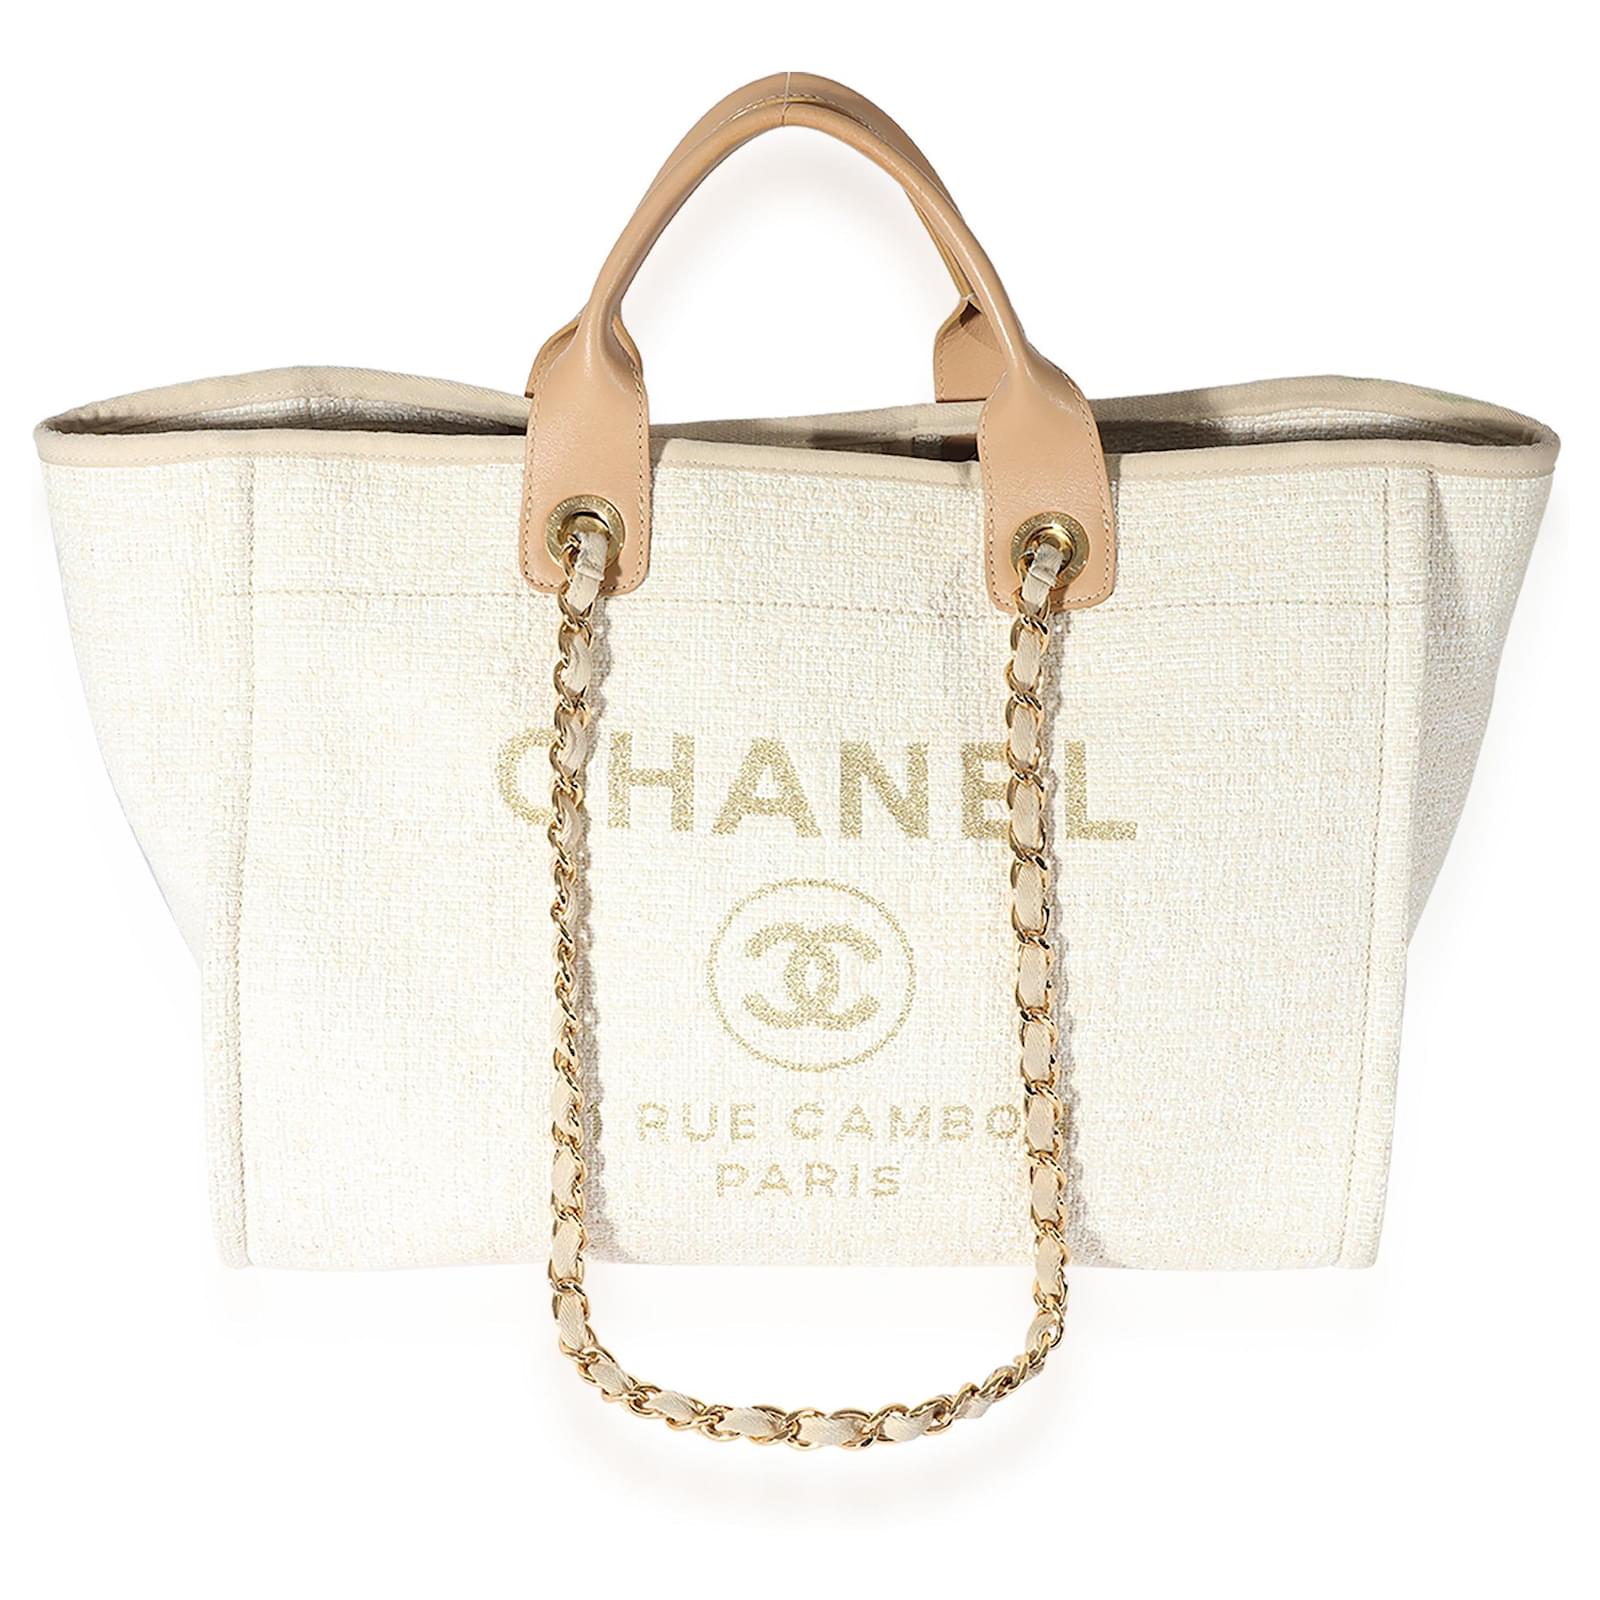 Chanel Extra Large Deauville Tote